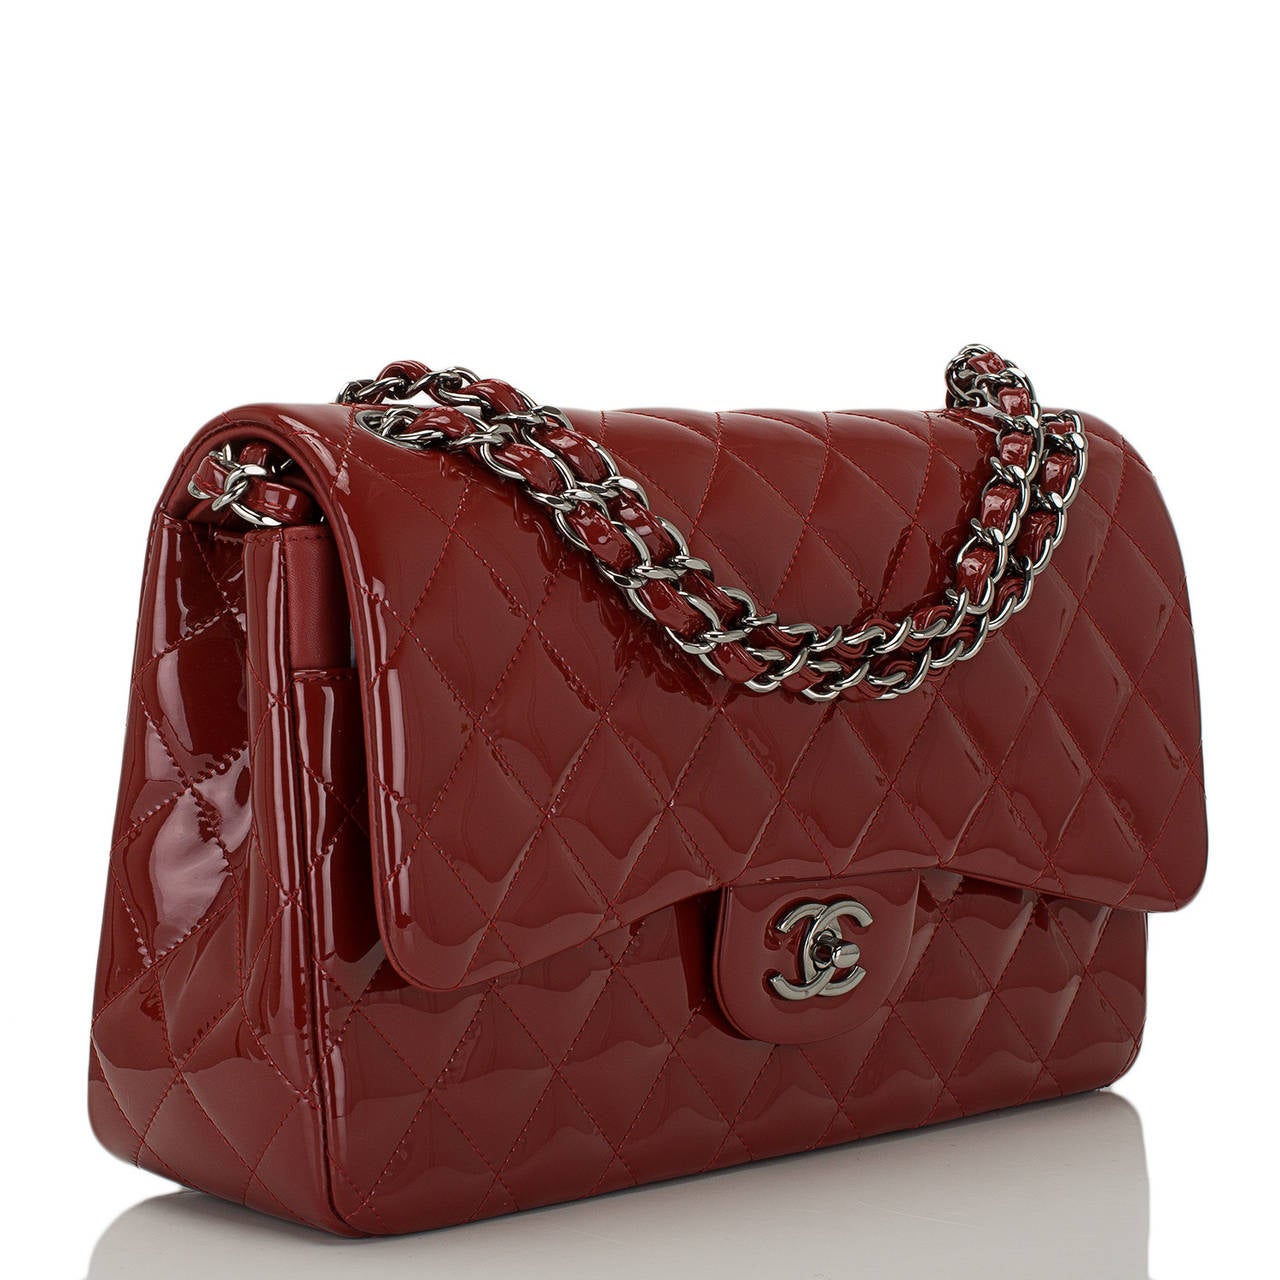 Chanel Jumbo Classic double flap of dark red patent leather with ruthenium hardware.

This bag features a front flap with signature CC turnlock closure, a half moon back pocket, and an adjustable interwoven silver tone chain link with red leather